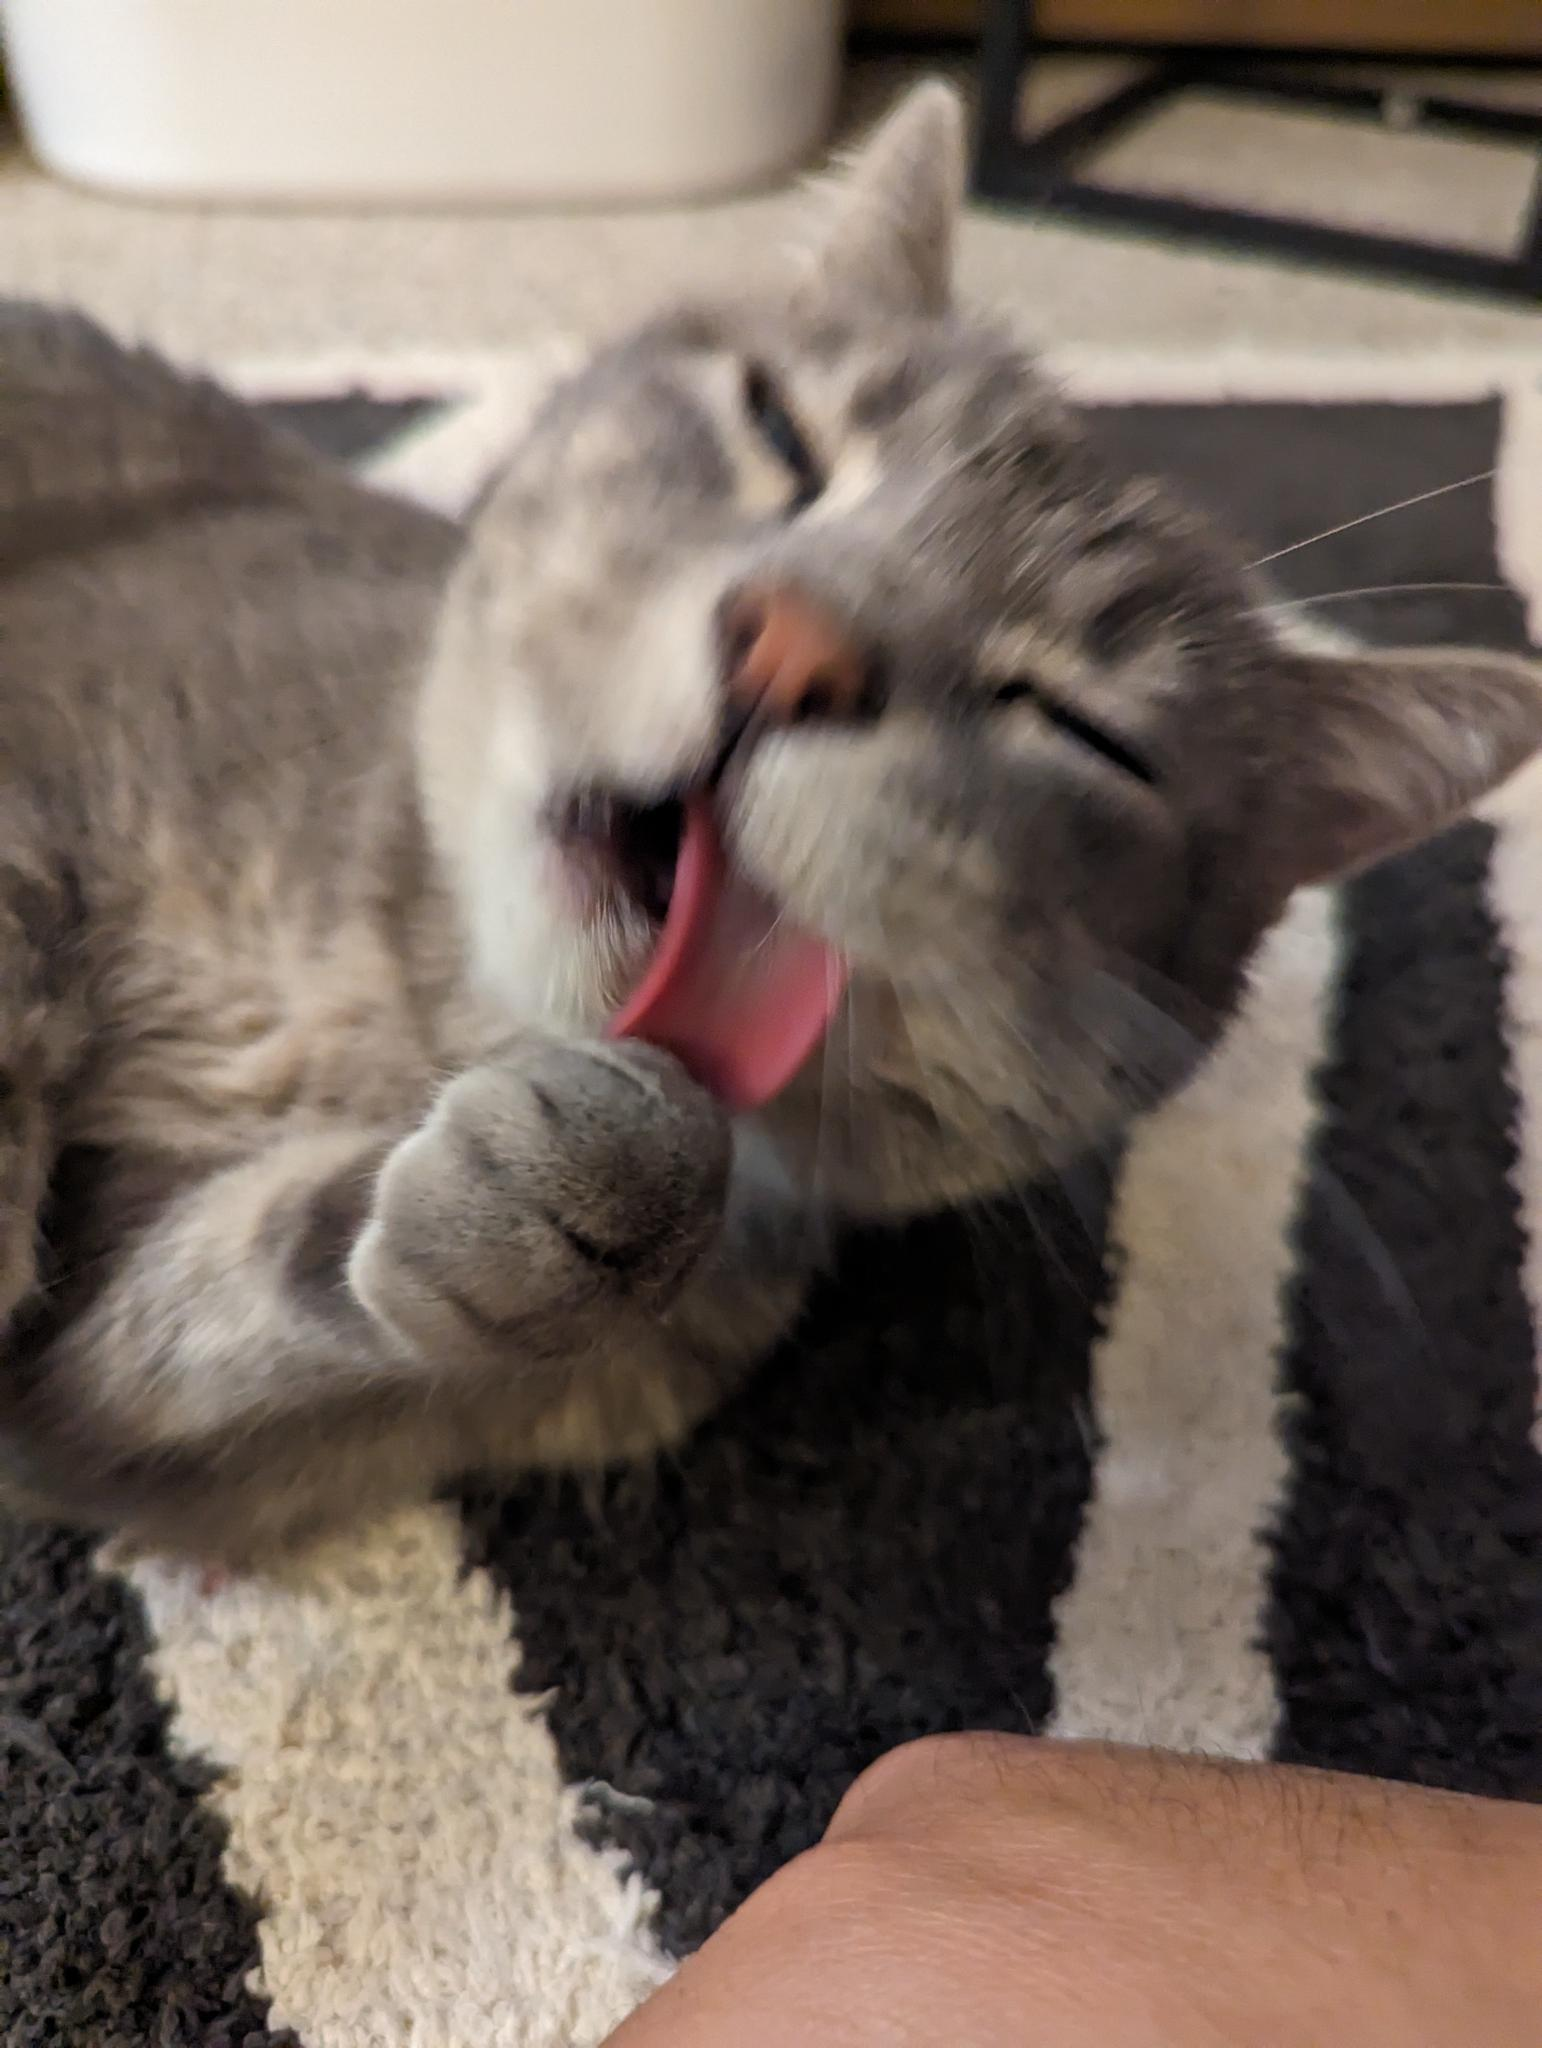 Masha, a gray cat, licking her paw with her tongue fully out of her mouth.